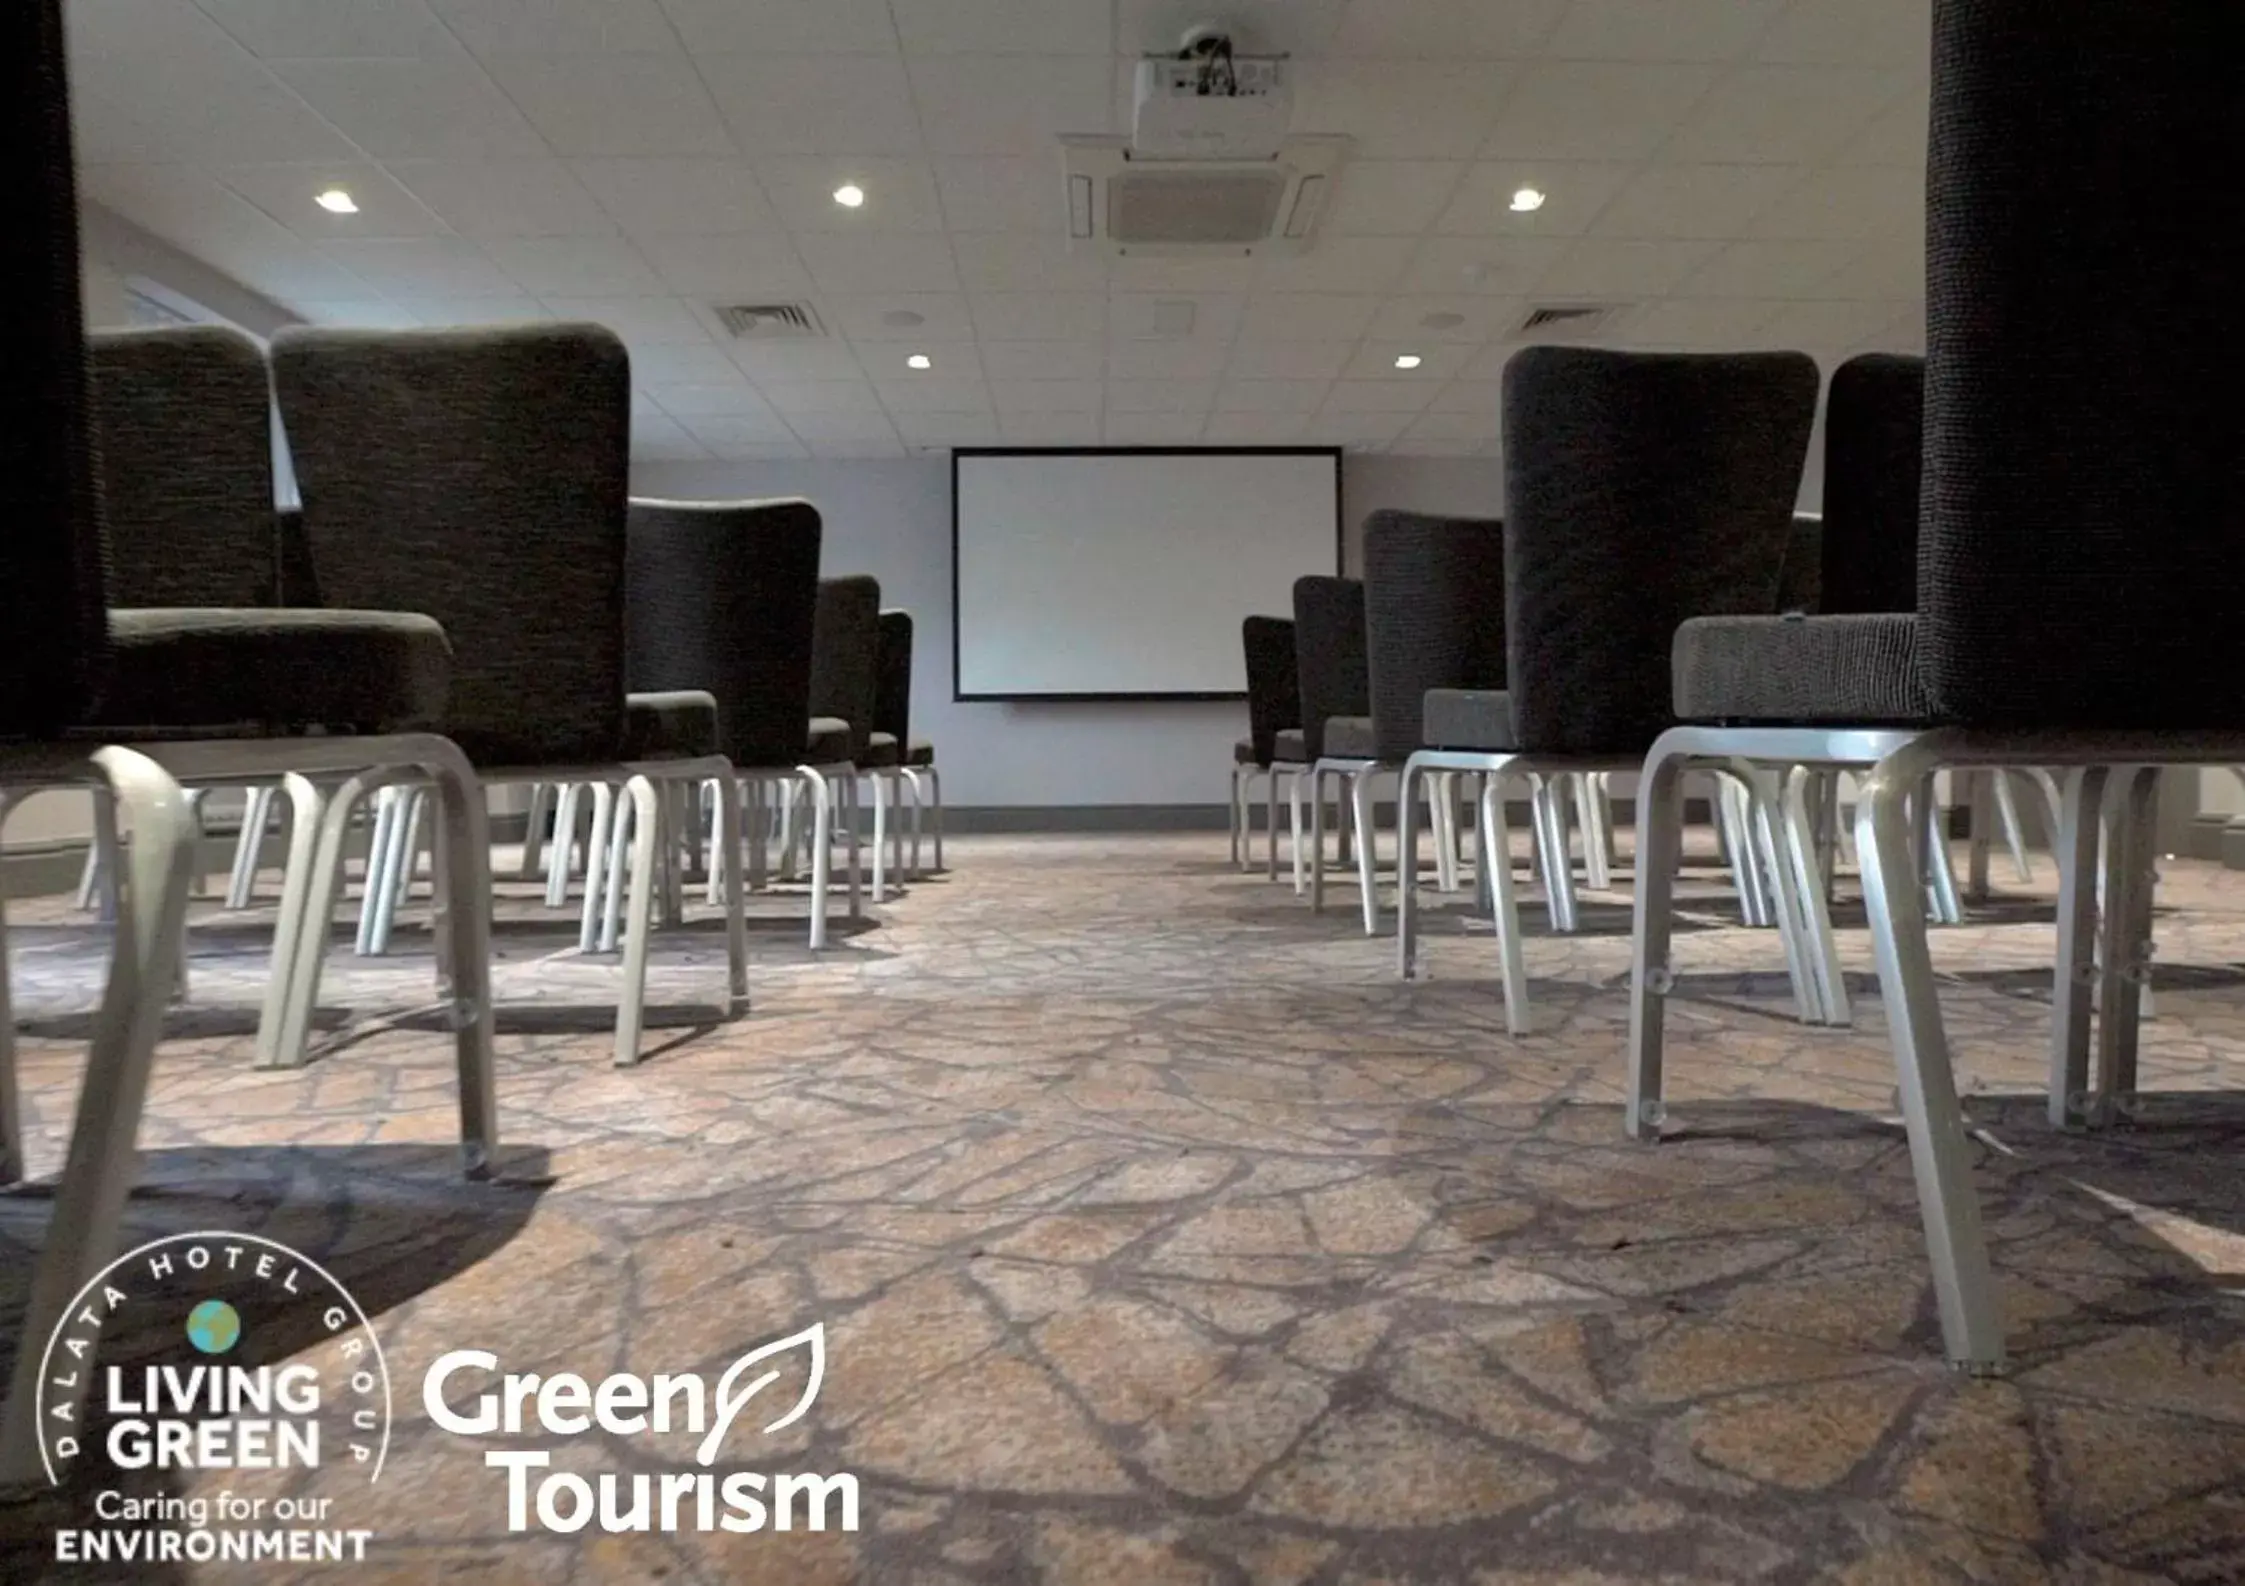 Meeting/conference room in Maldron Hotel, Newlands Cross